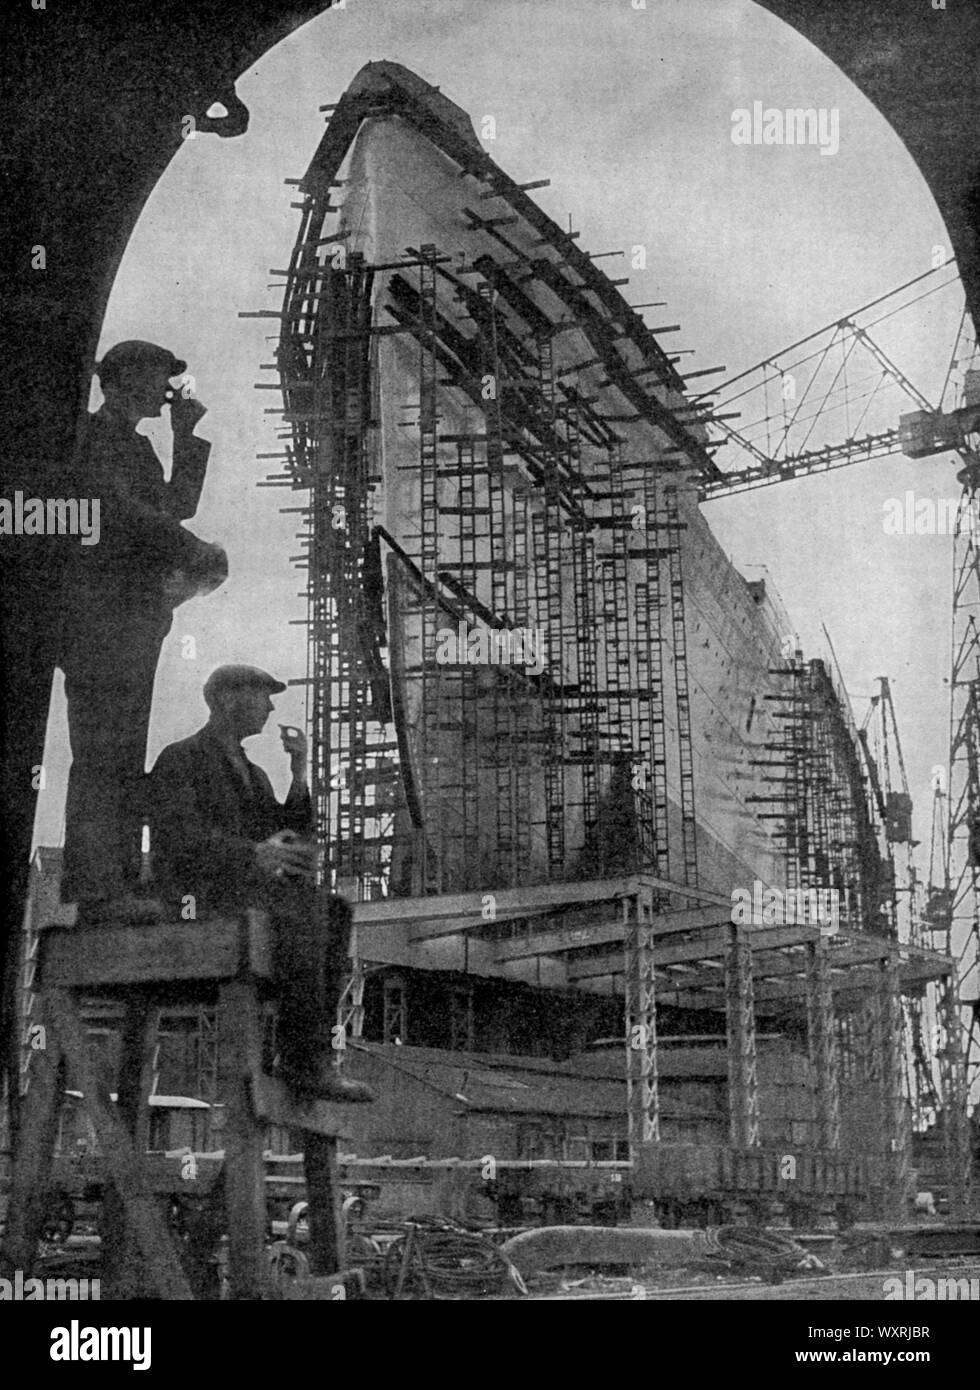 The building of the RMS Queen Mary, 1934. The RMS Queen Mary, British ocean liner that sailed primarily on the North Atlantic Ocean from 1936 to 1967 for the Cunard-White Star Line. Here we see her at the shipbuilders John Brown & Company, Clydebank, Scotland. Stock Photo